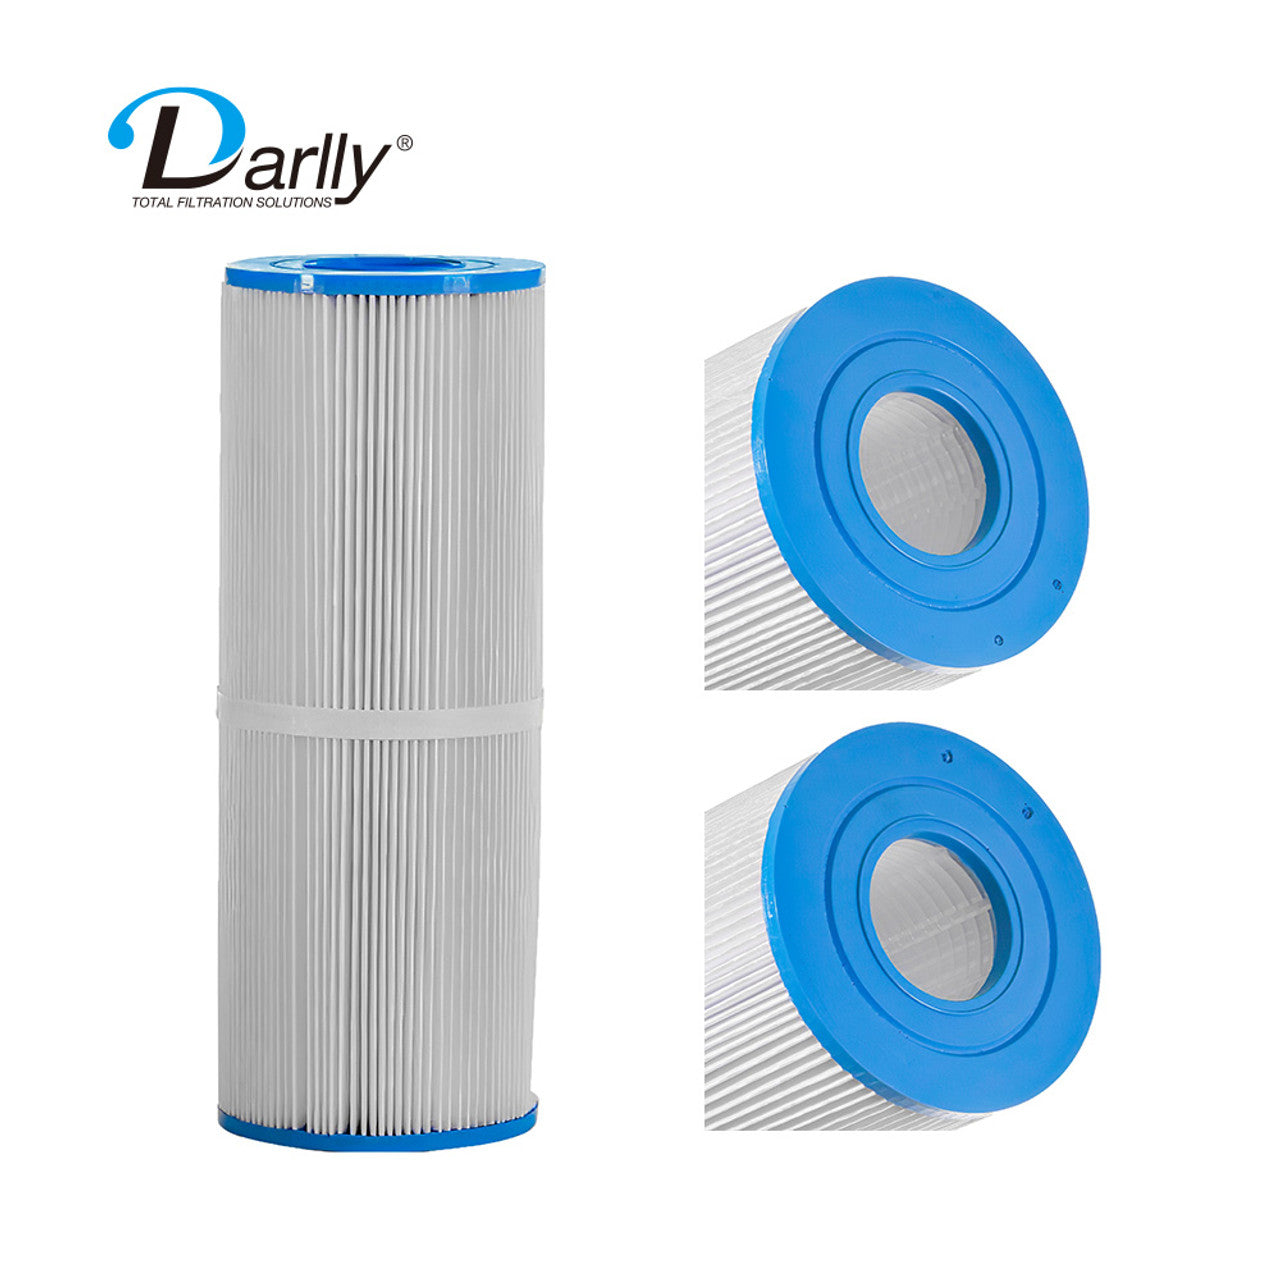 Darlly Filter 42521 Spa Filter Replaces Pleatco PRB25-IN-4, Unicel C-4625, and FC-2370